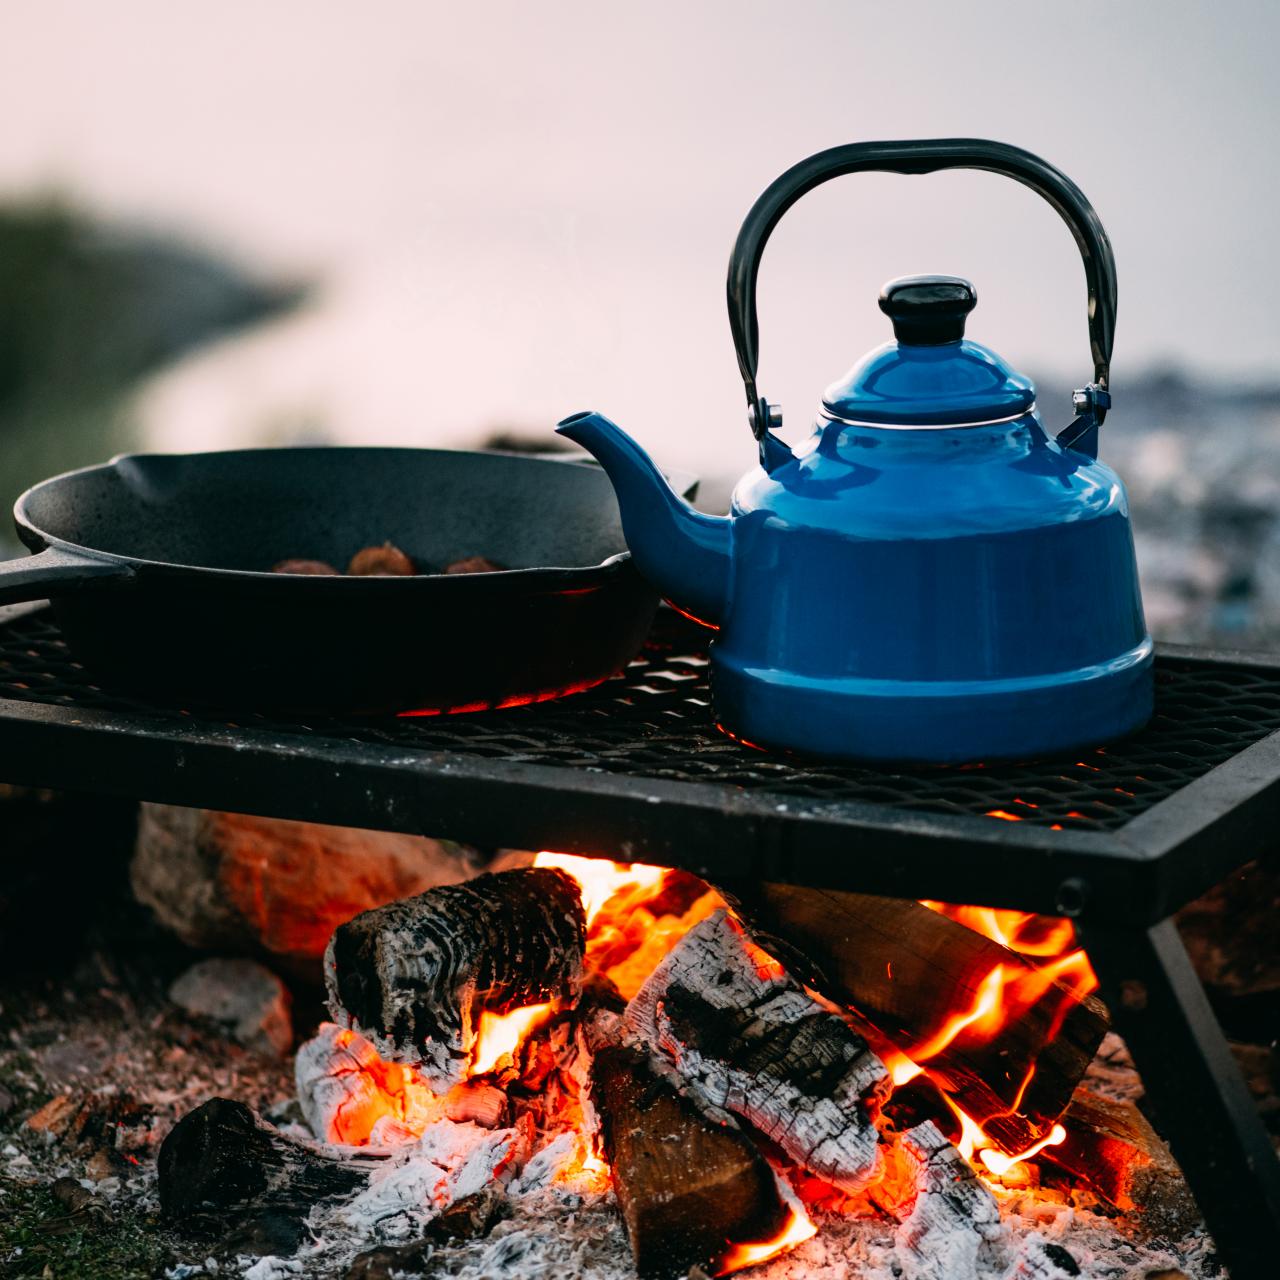 Smoked Tourist Kettle On Camp Fire Stock Photo, Picture and